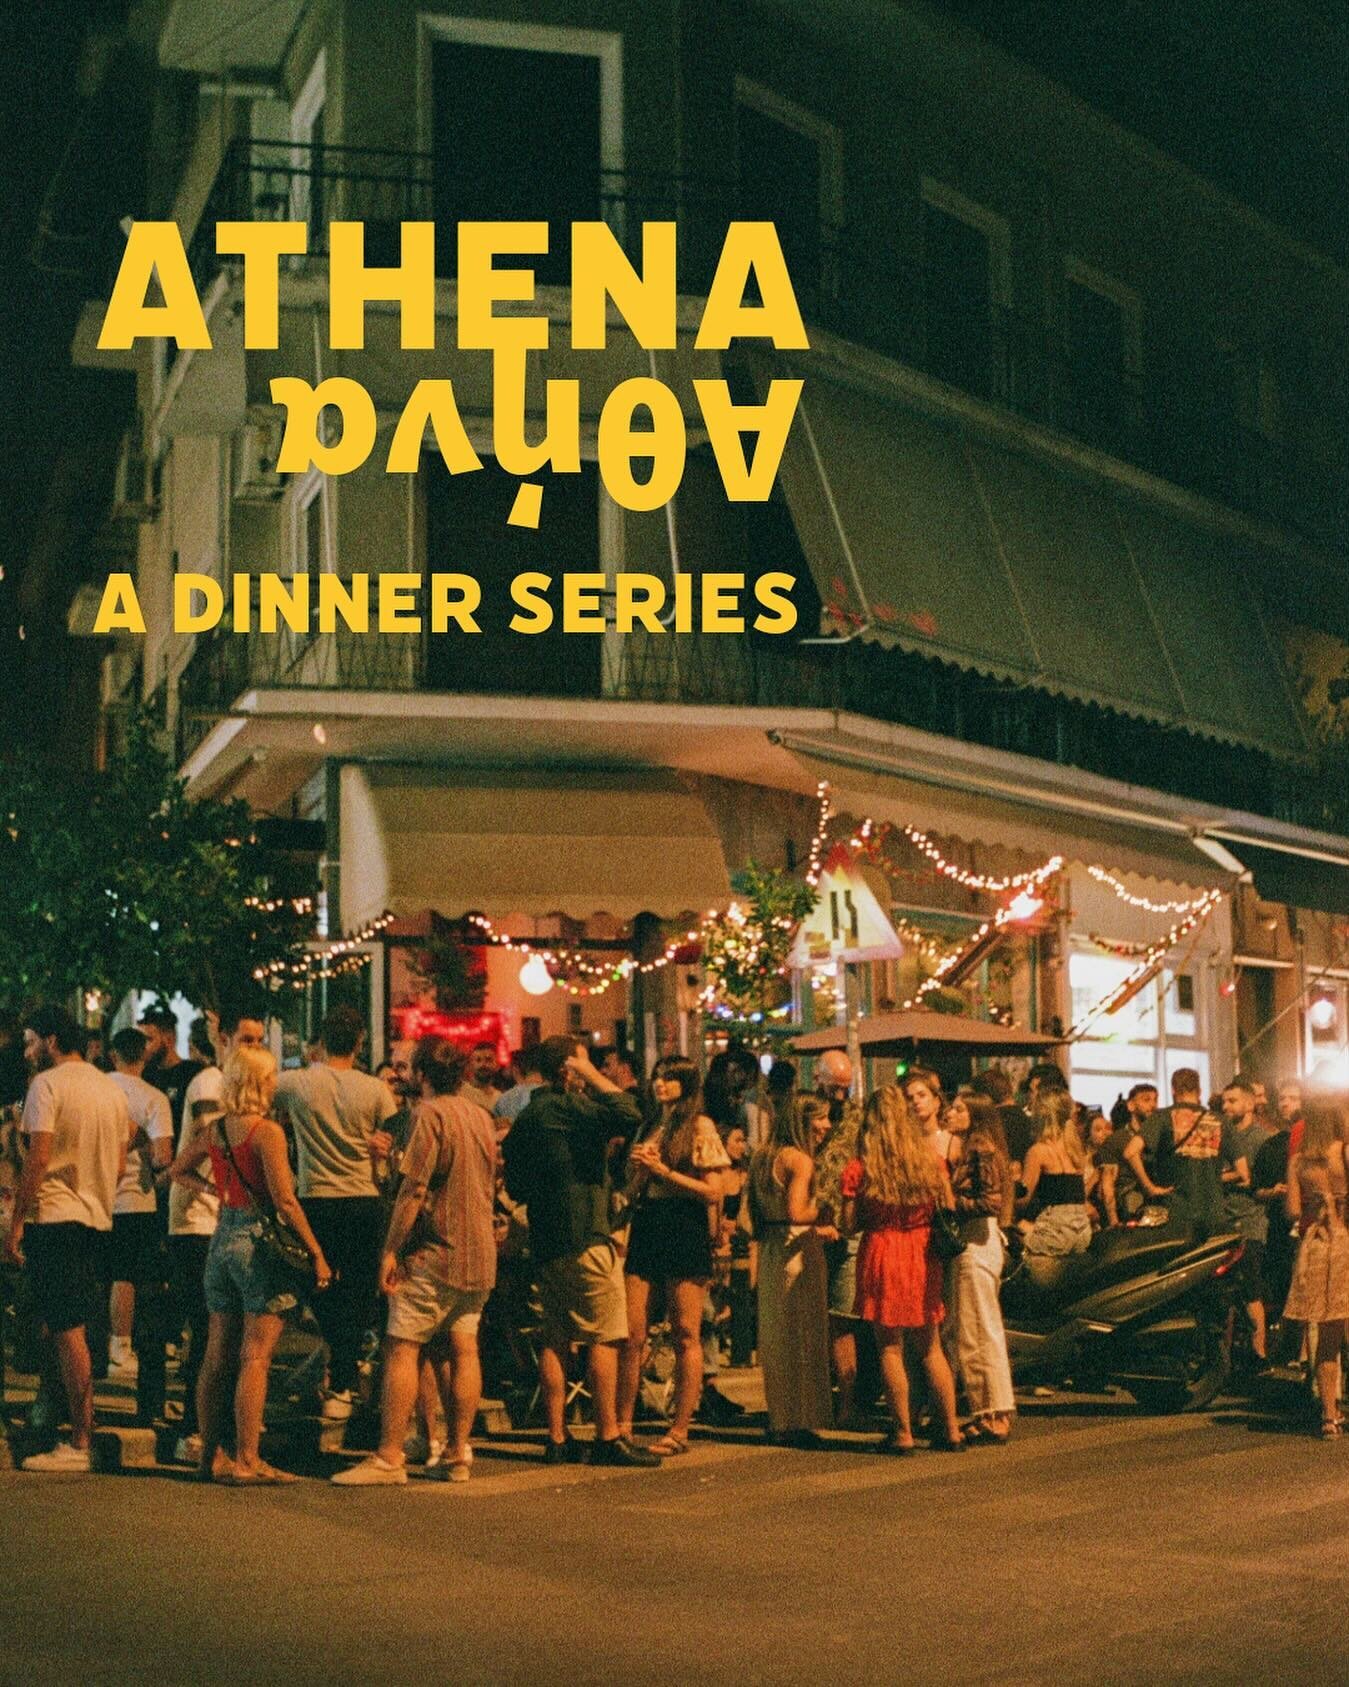 Join us for our last @athenadinners of 2023! We're going to change things up a bit next year and how that will look is - tbd! So in the meantime, c'mon over and enjoy a warming end of the year festive meal 🌿

LiNk iN BiO!